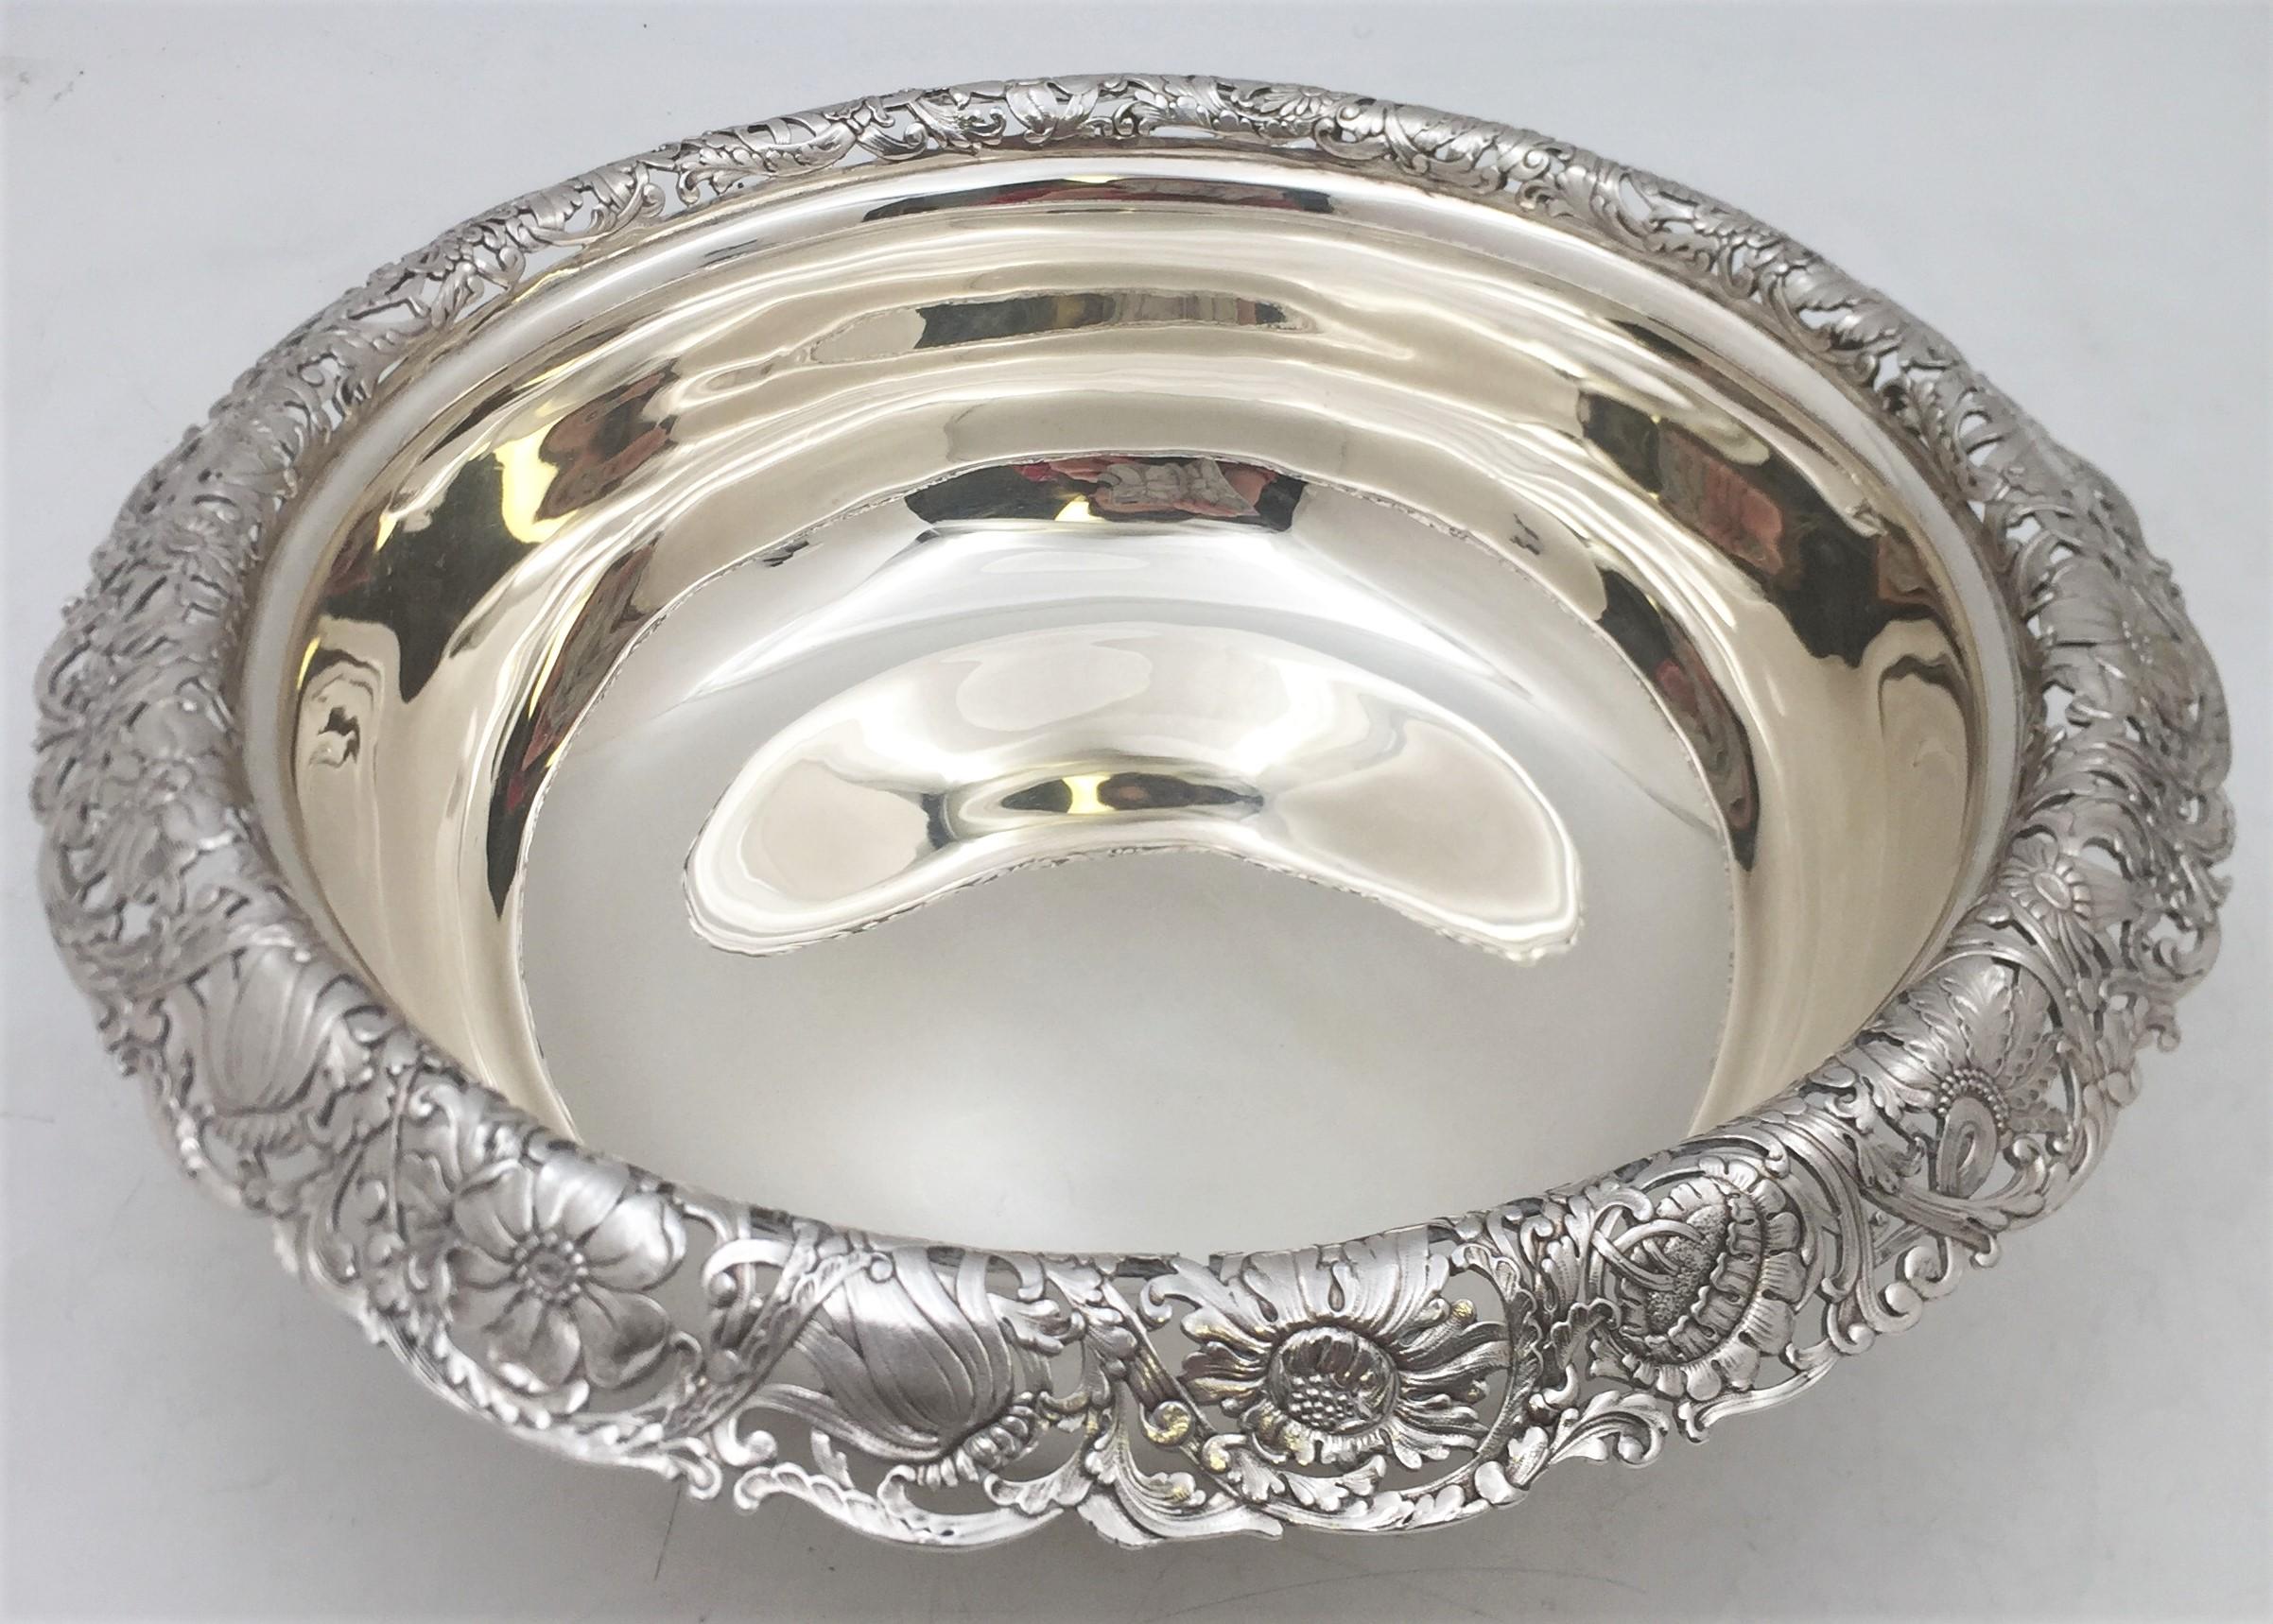 Tiffany & Co. Sterling Silver 1890s Bowl in Art Nouveau Style In Good Condition For Sale In New York, NY